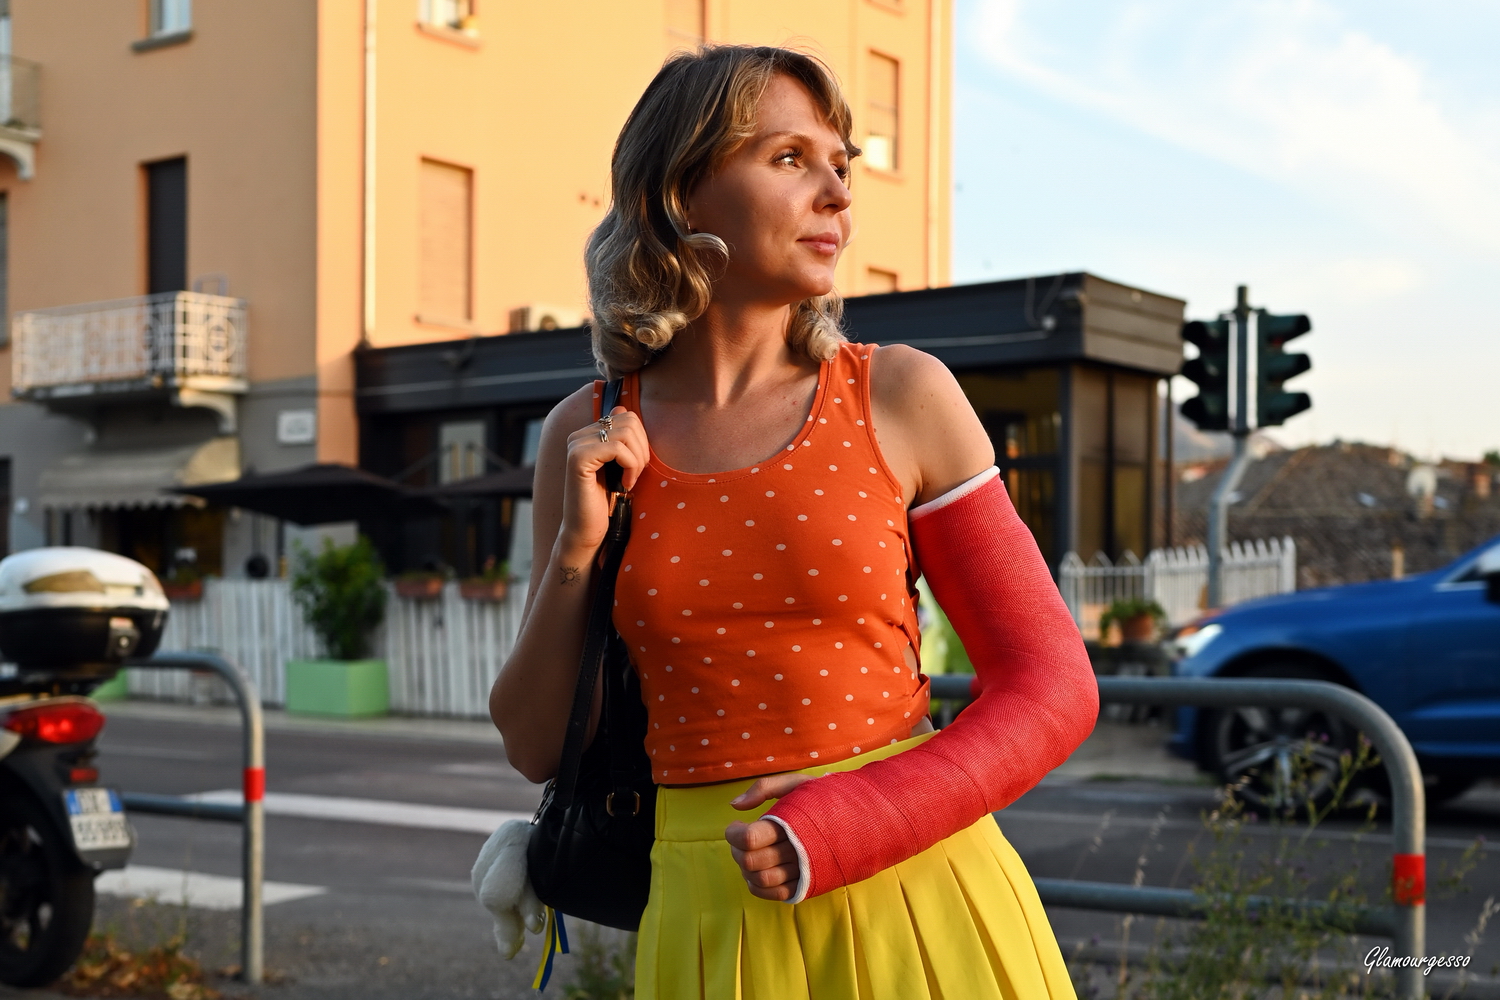 Svitlana Red LAC - VIDEO 01: Let's the journey begin!: Svitlana is dressed in a colorful top and skirt and has her left arm tied in a sling and completely immobilized in a red fiber cast. She invites you to follow her on her trip to Monza to watch ca